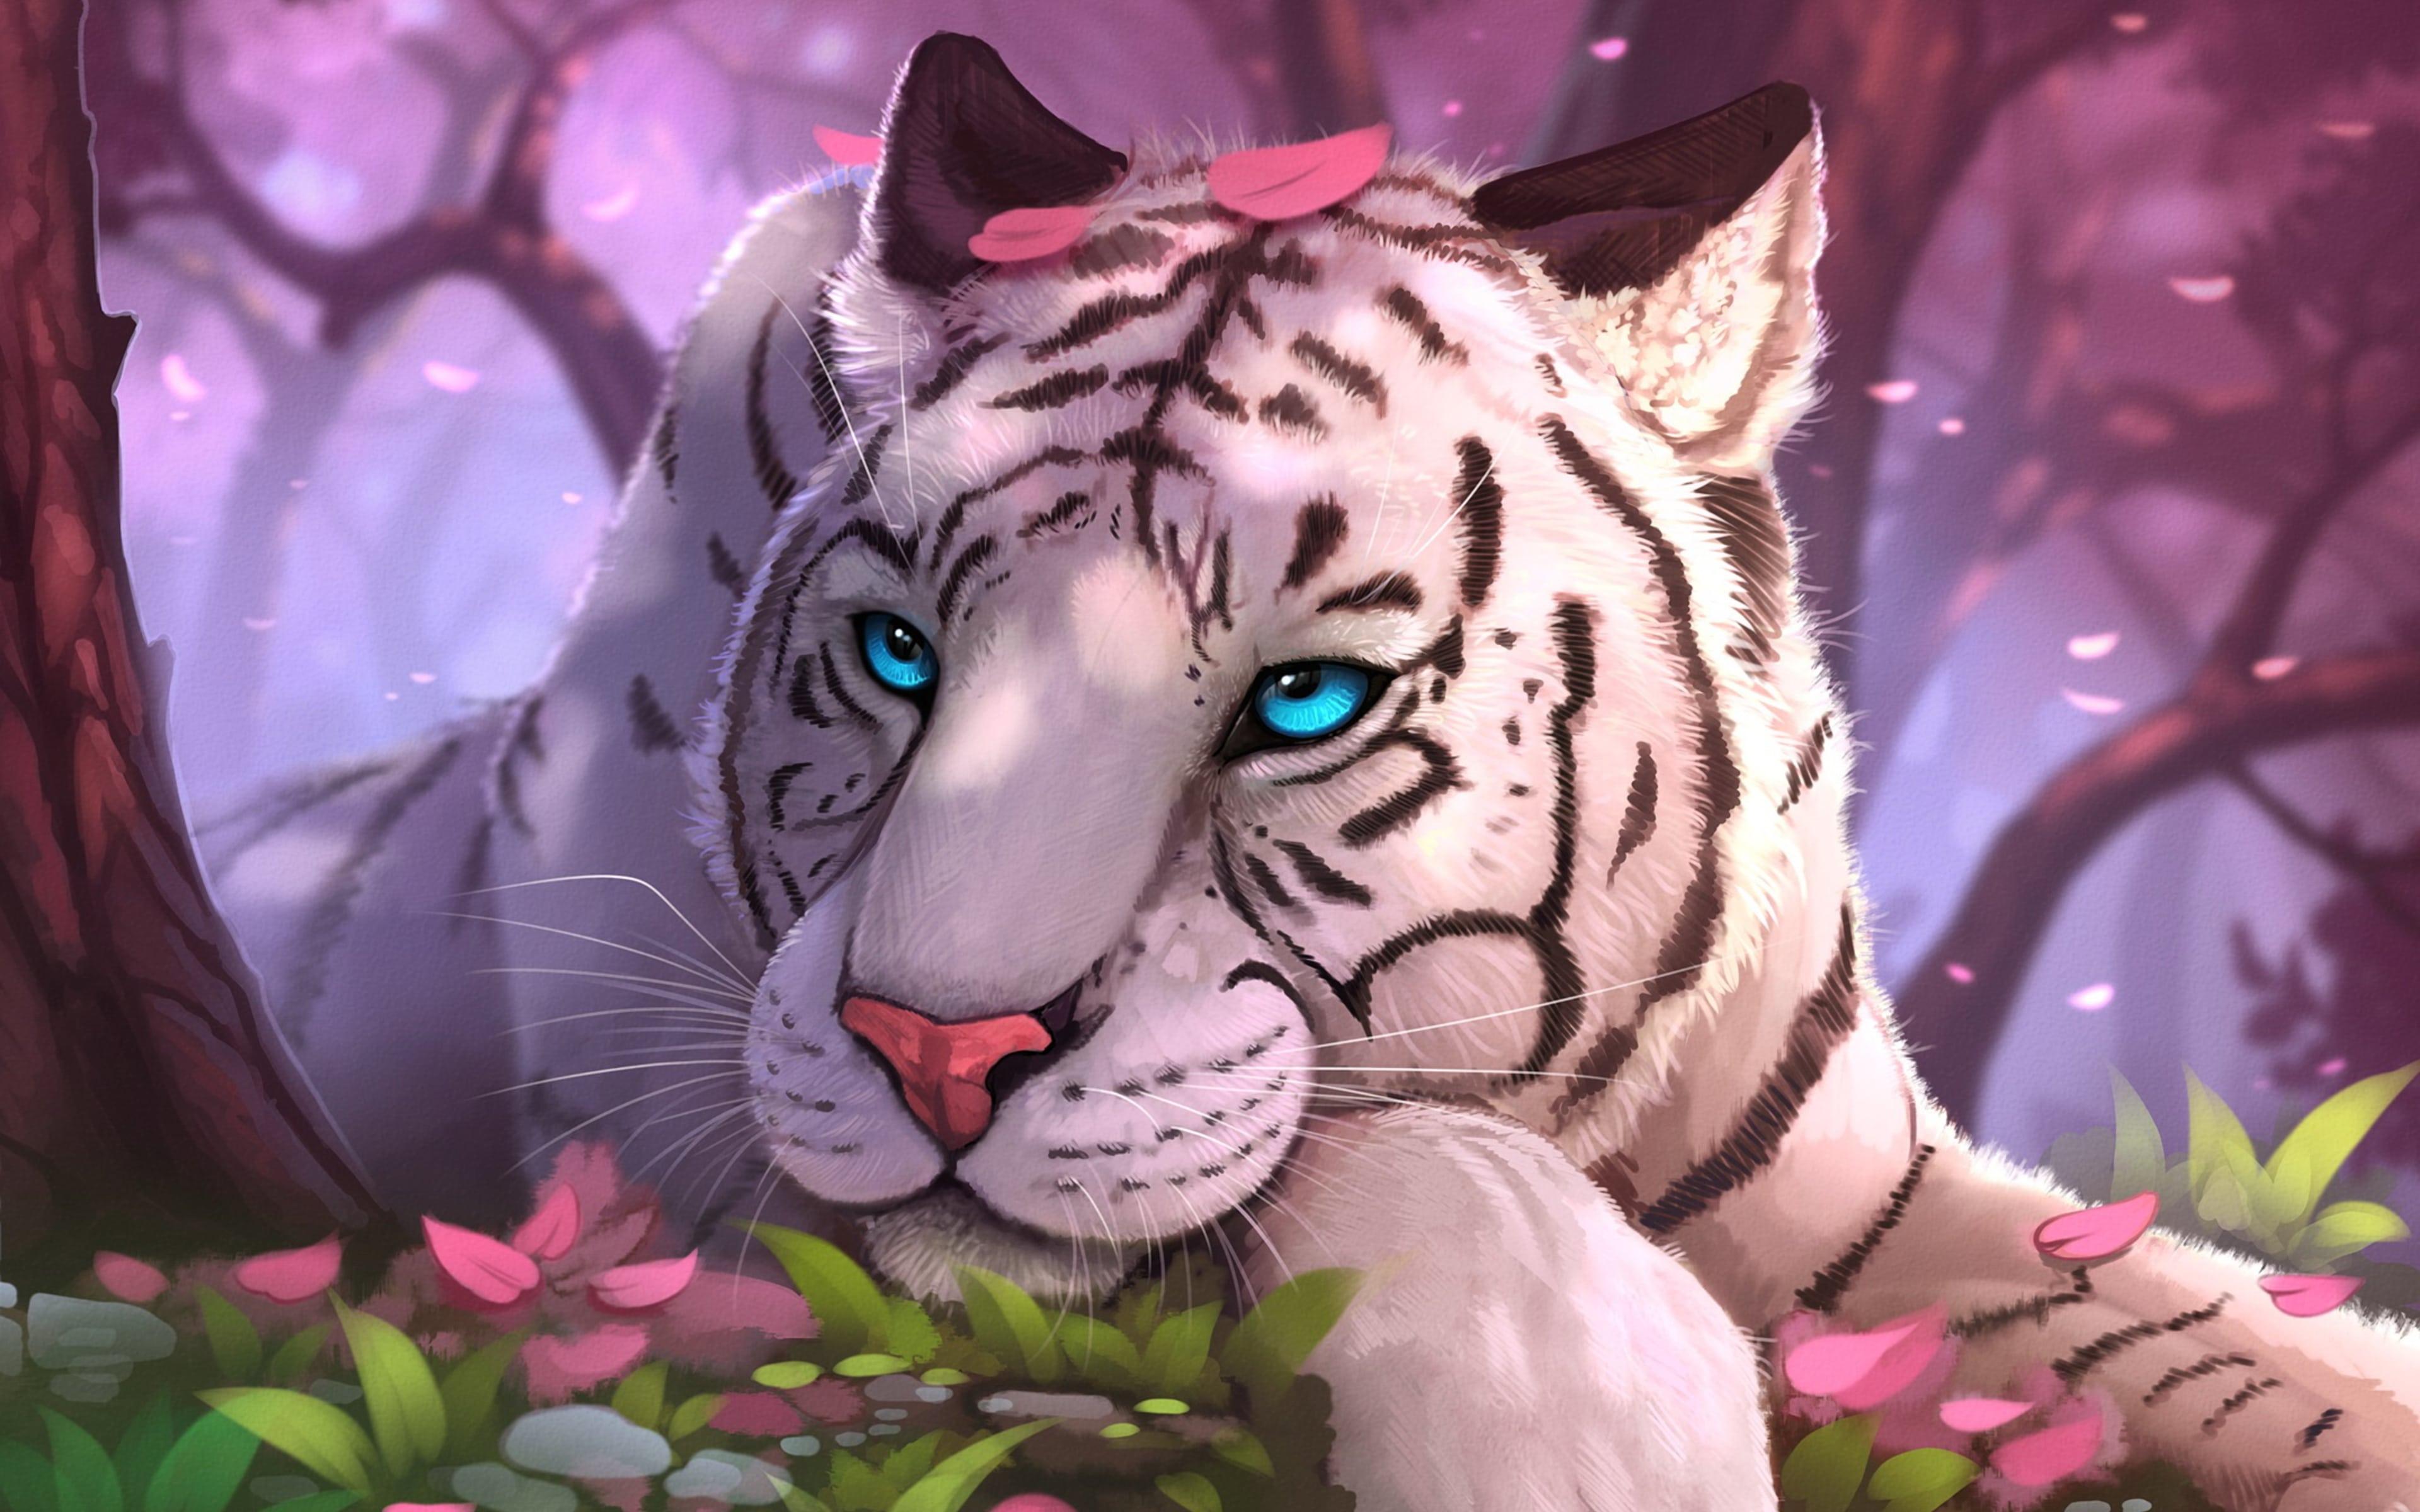 White tiger pink forest fantasy art Wallpaper and Free Stock